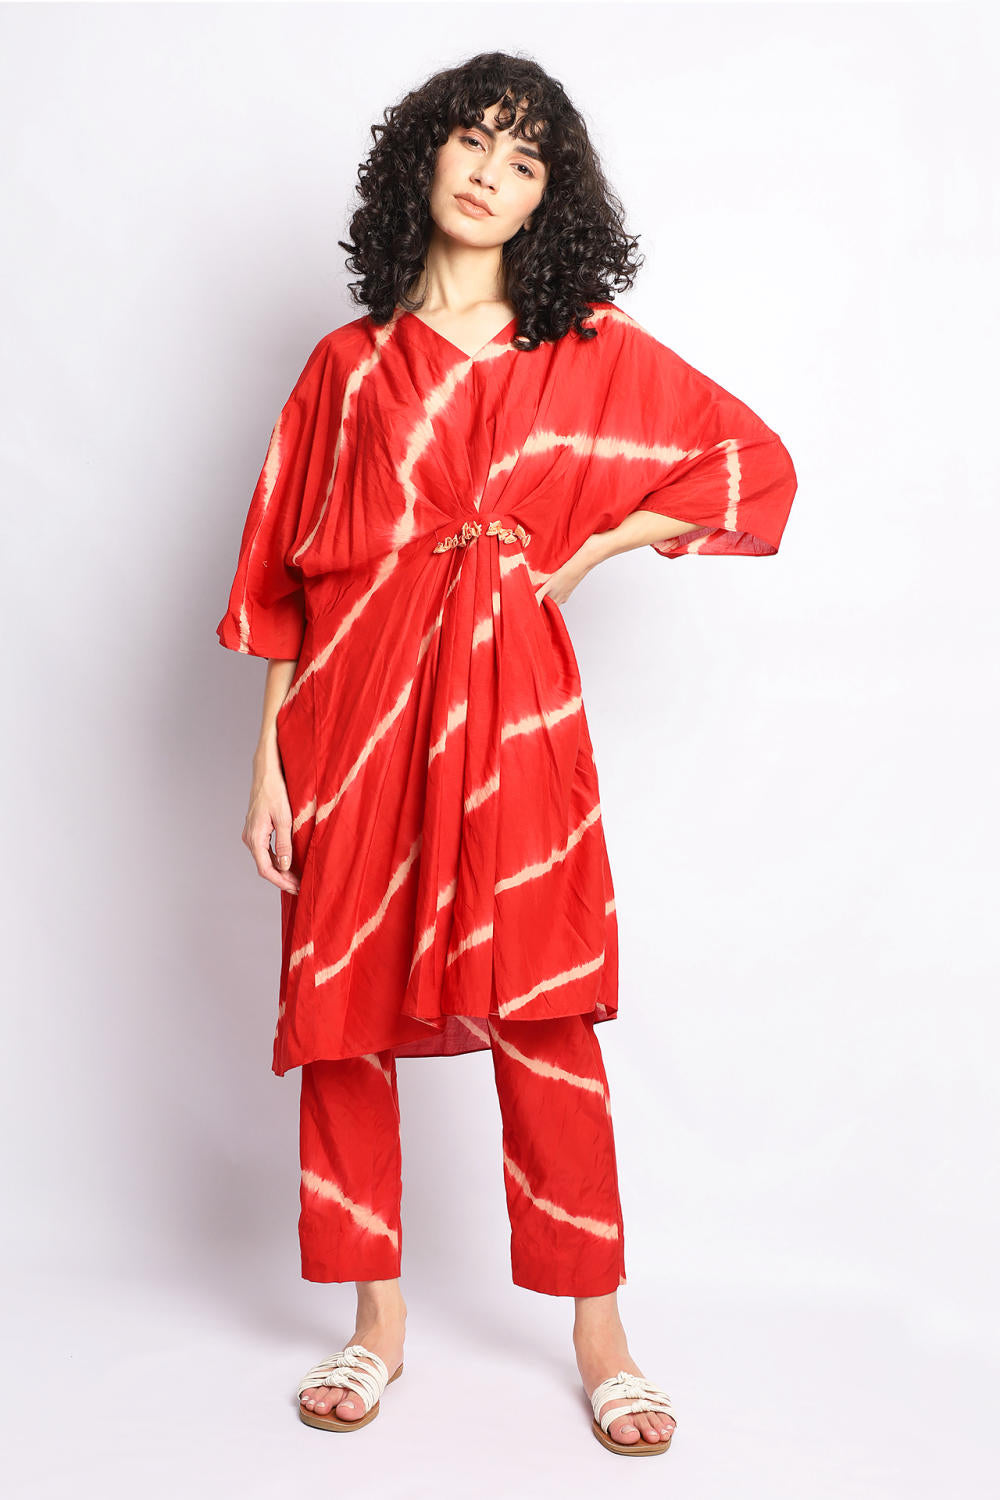 RED AND BEIGE KAFTAN CO-ORD SET Fashion The Pot Plant